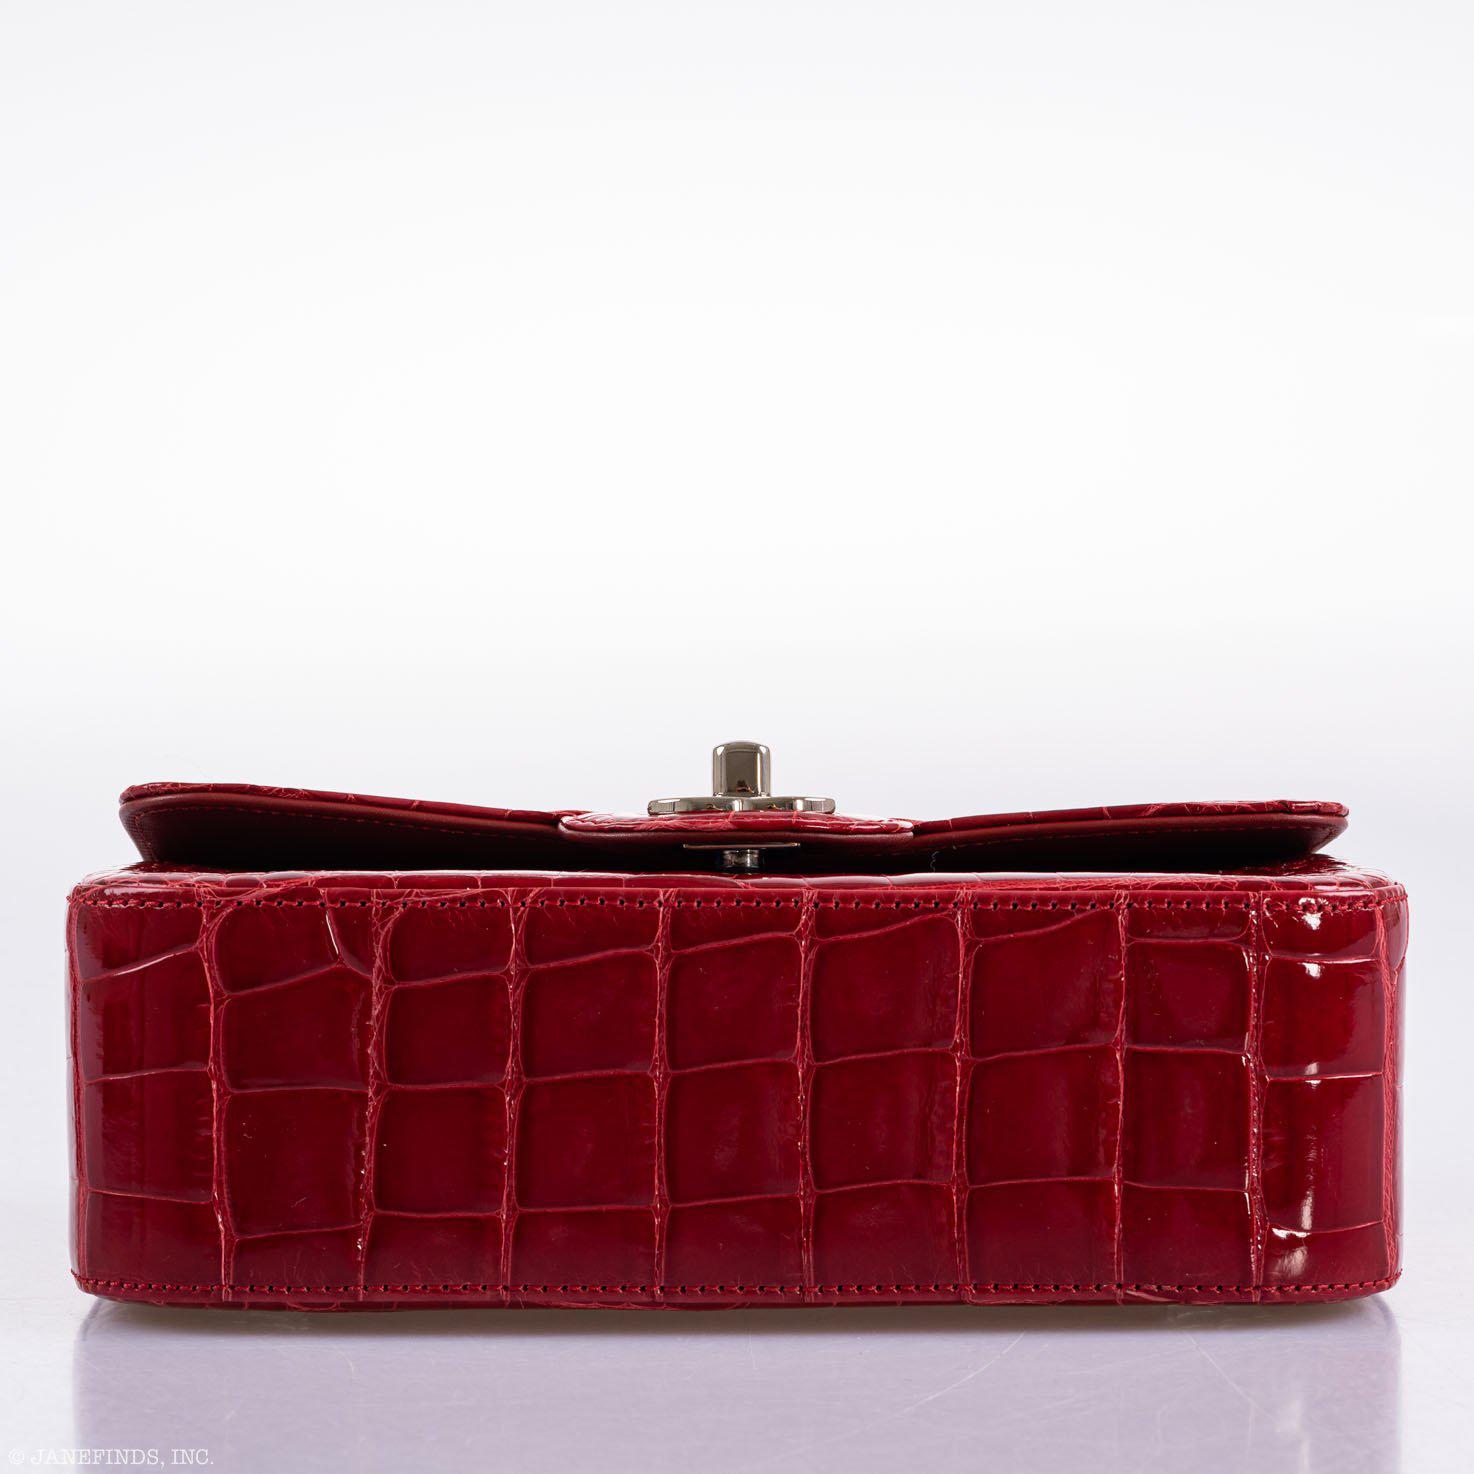 CHANEL Red Shiny Alligator Classic Mini Flap Bag with Silver Hardware